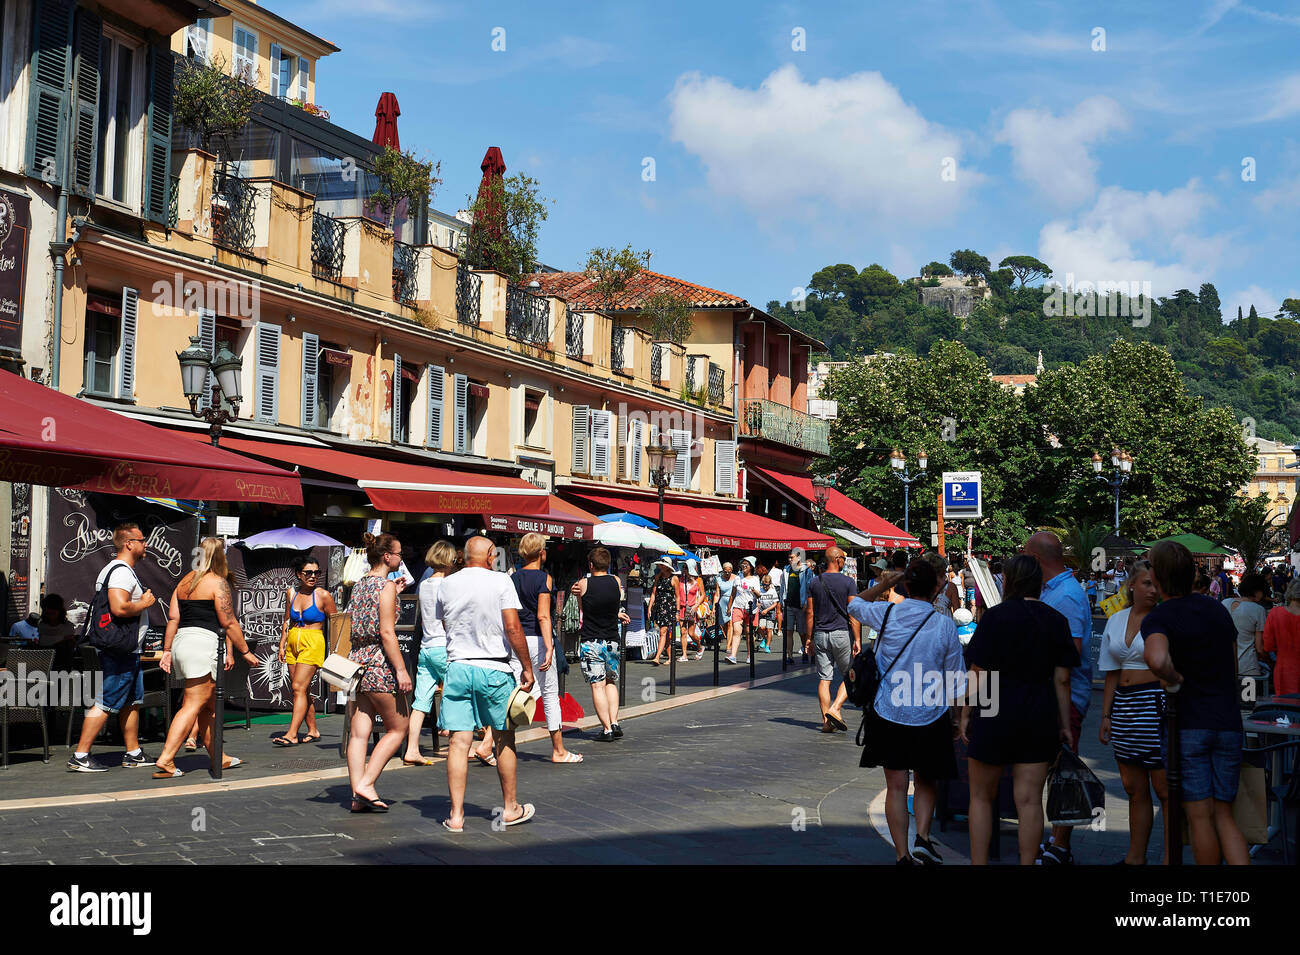 Nice (south-eastern France): “rue Saint-Francois de Paule” street in the Old City of Nice. Tourists and shops *** Local Caption *** Stock Photo